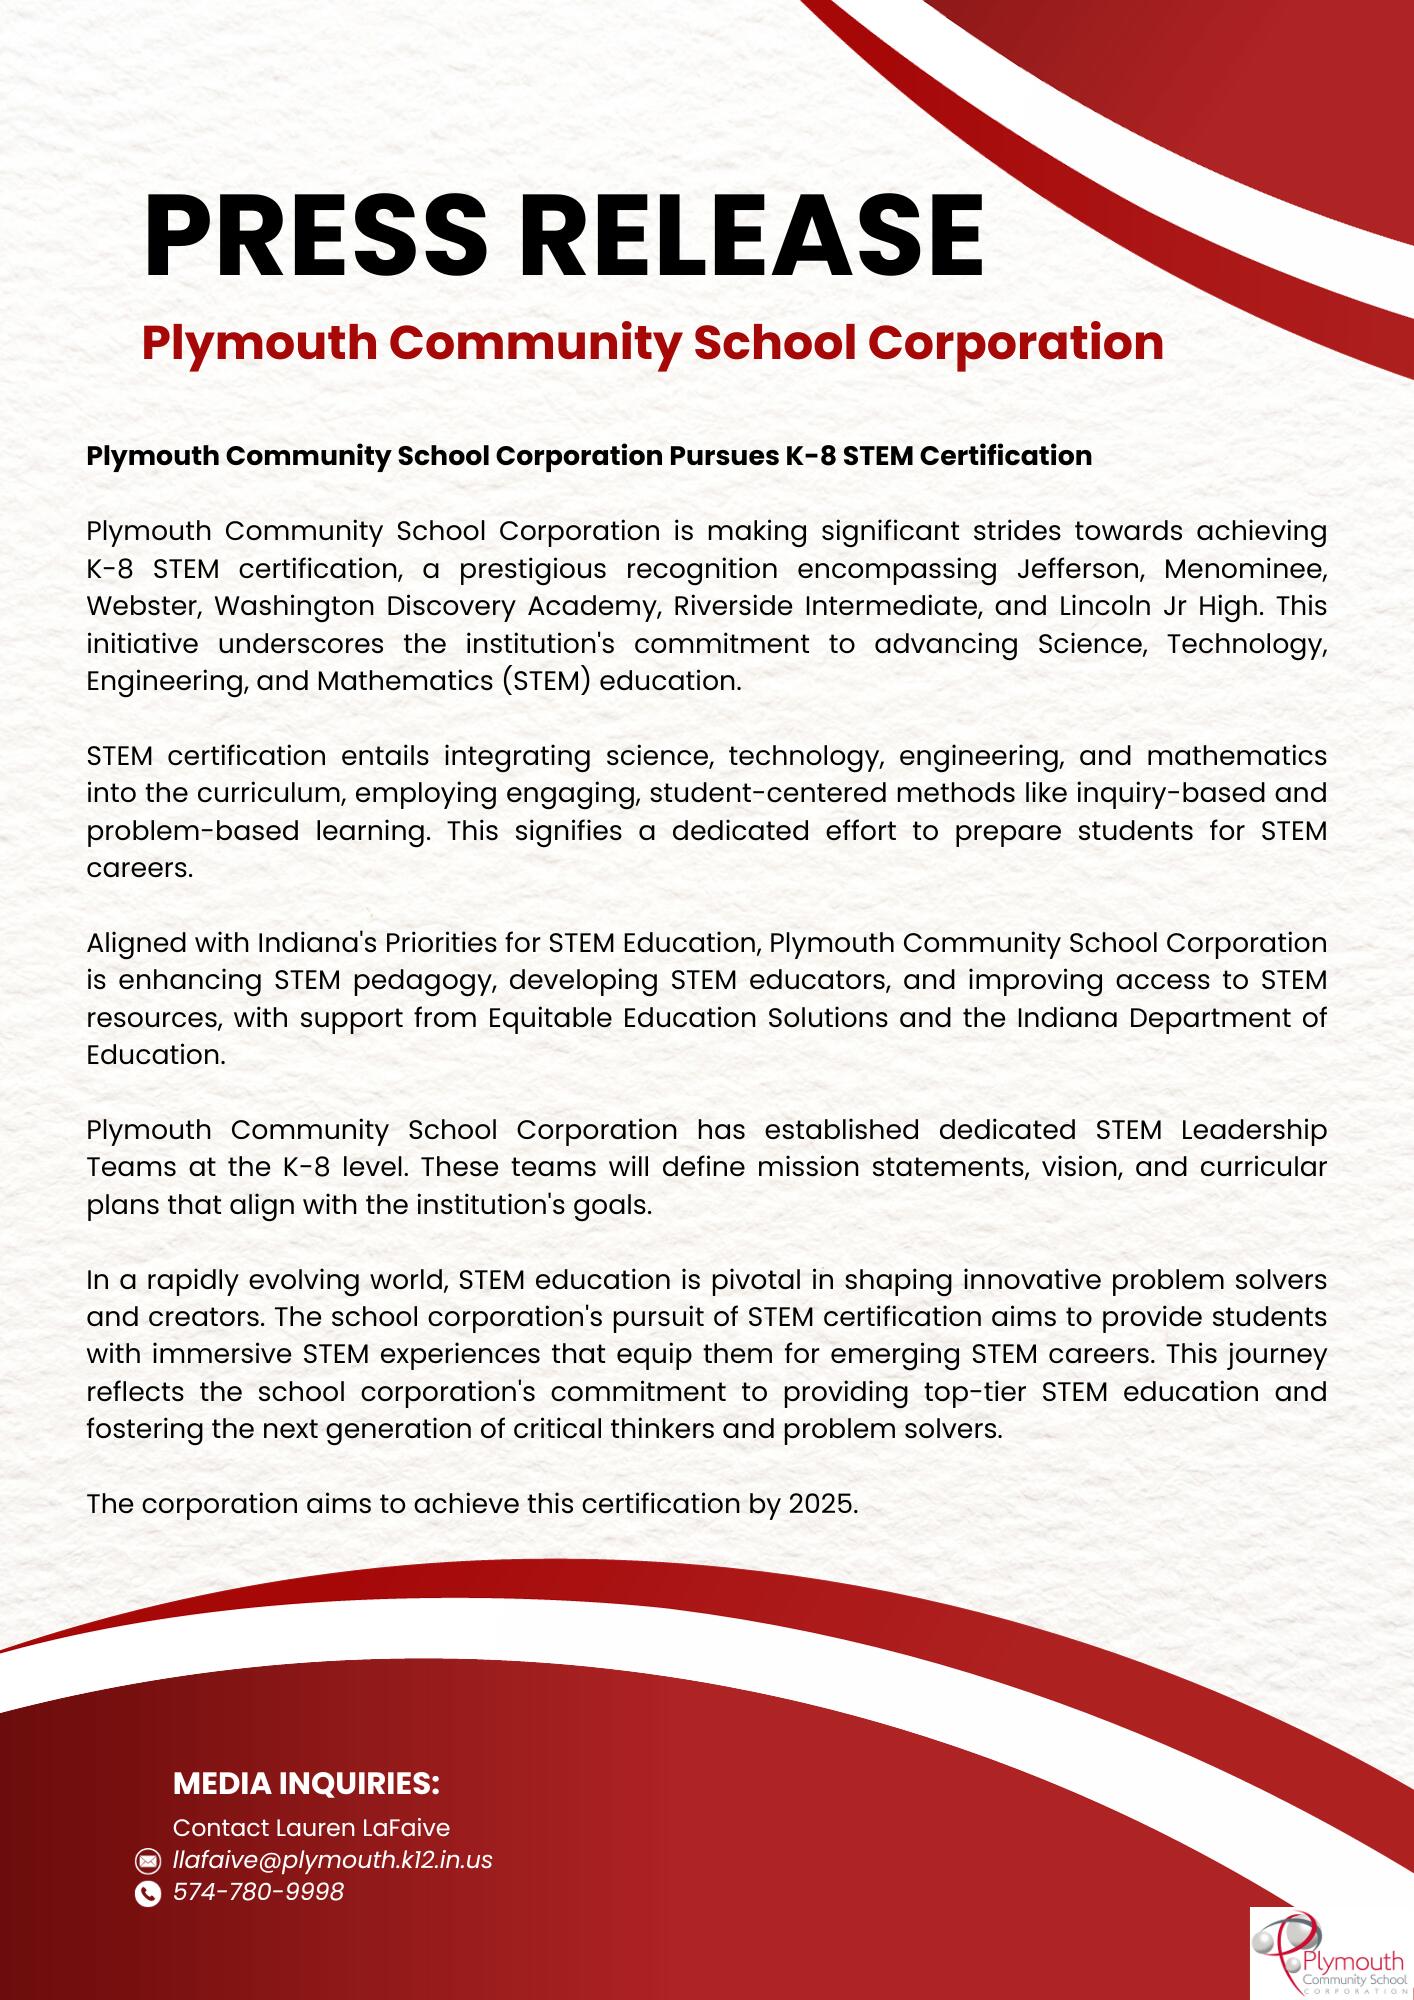 Plymouth Community School Corporation Pursues K-8 STEM Certification  Plymouth Community School Corporation is making significant strides towards achieving K-8 STEM certification, a prestigious recognition encompassing Jefferson, Menominee, Webster, Washington Discovery Academy, Riverside Intermediate, and Lincoln Jr High. This initiative underscores the institution's commitment to advancing Science, Technology, Engineering, and Mathematics (STEM) education.  STEM certification entails integrating science, technology, engineering, and mathematics into the curriculum, employing engaging, student-centered methods like inquiry-based and problem-based learning. This signifies a dedicated effort to prepare students for STEM careers.  Aligned with Indiana's Priorities for STEM Education, Plymouth Community School Corporation is enhancing STEM pedagogy, developing STEM educators, and improving access to STEM resources, with support from Equitable Education Solutions and the Indiana Department of Education.  Plymouth Community School Corporation has established dedicated STEM Leadership Teams at the K-8 level. These teams will define mission statements, vision, and curricular plans that align with the institution's goals.   In a rapidly evolving world, STEM education is pivotal in shaping innovative problem solvers and creators. The school corporation's pursuit of STEM certification aims to provide students with immersive STEM experiences that equip them for emerging STEM careers. This journey reflects the school corporation's commitment to providing top-tier STEM education and fostering the next generation of critical thinkers and problem solvers.  The corporation aims to achieve this certification by 2025.